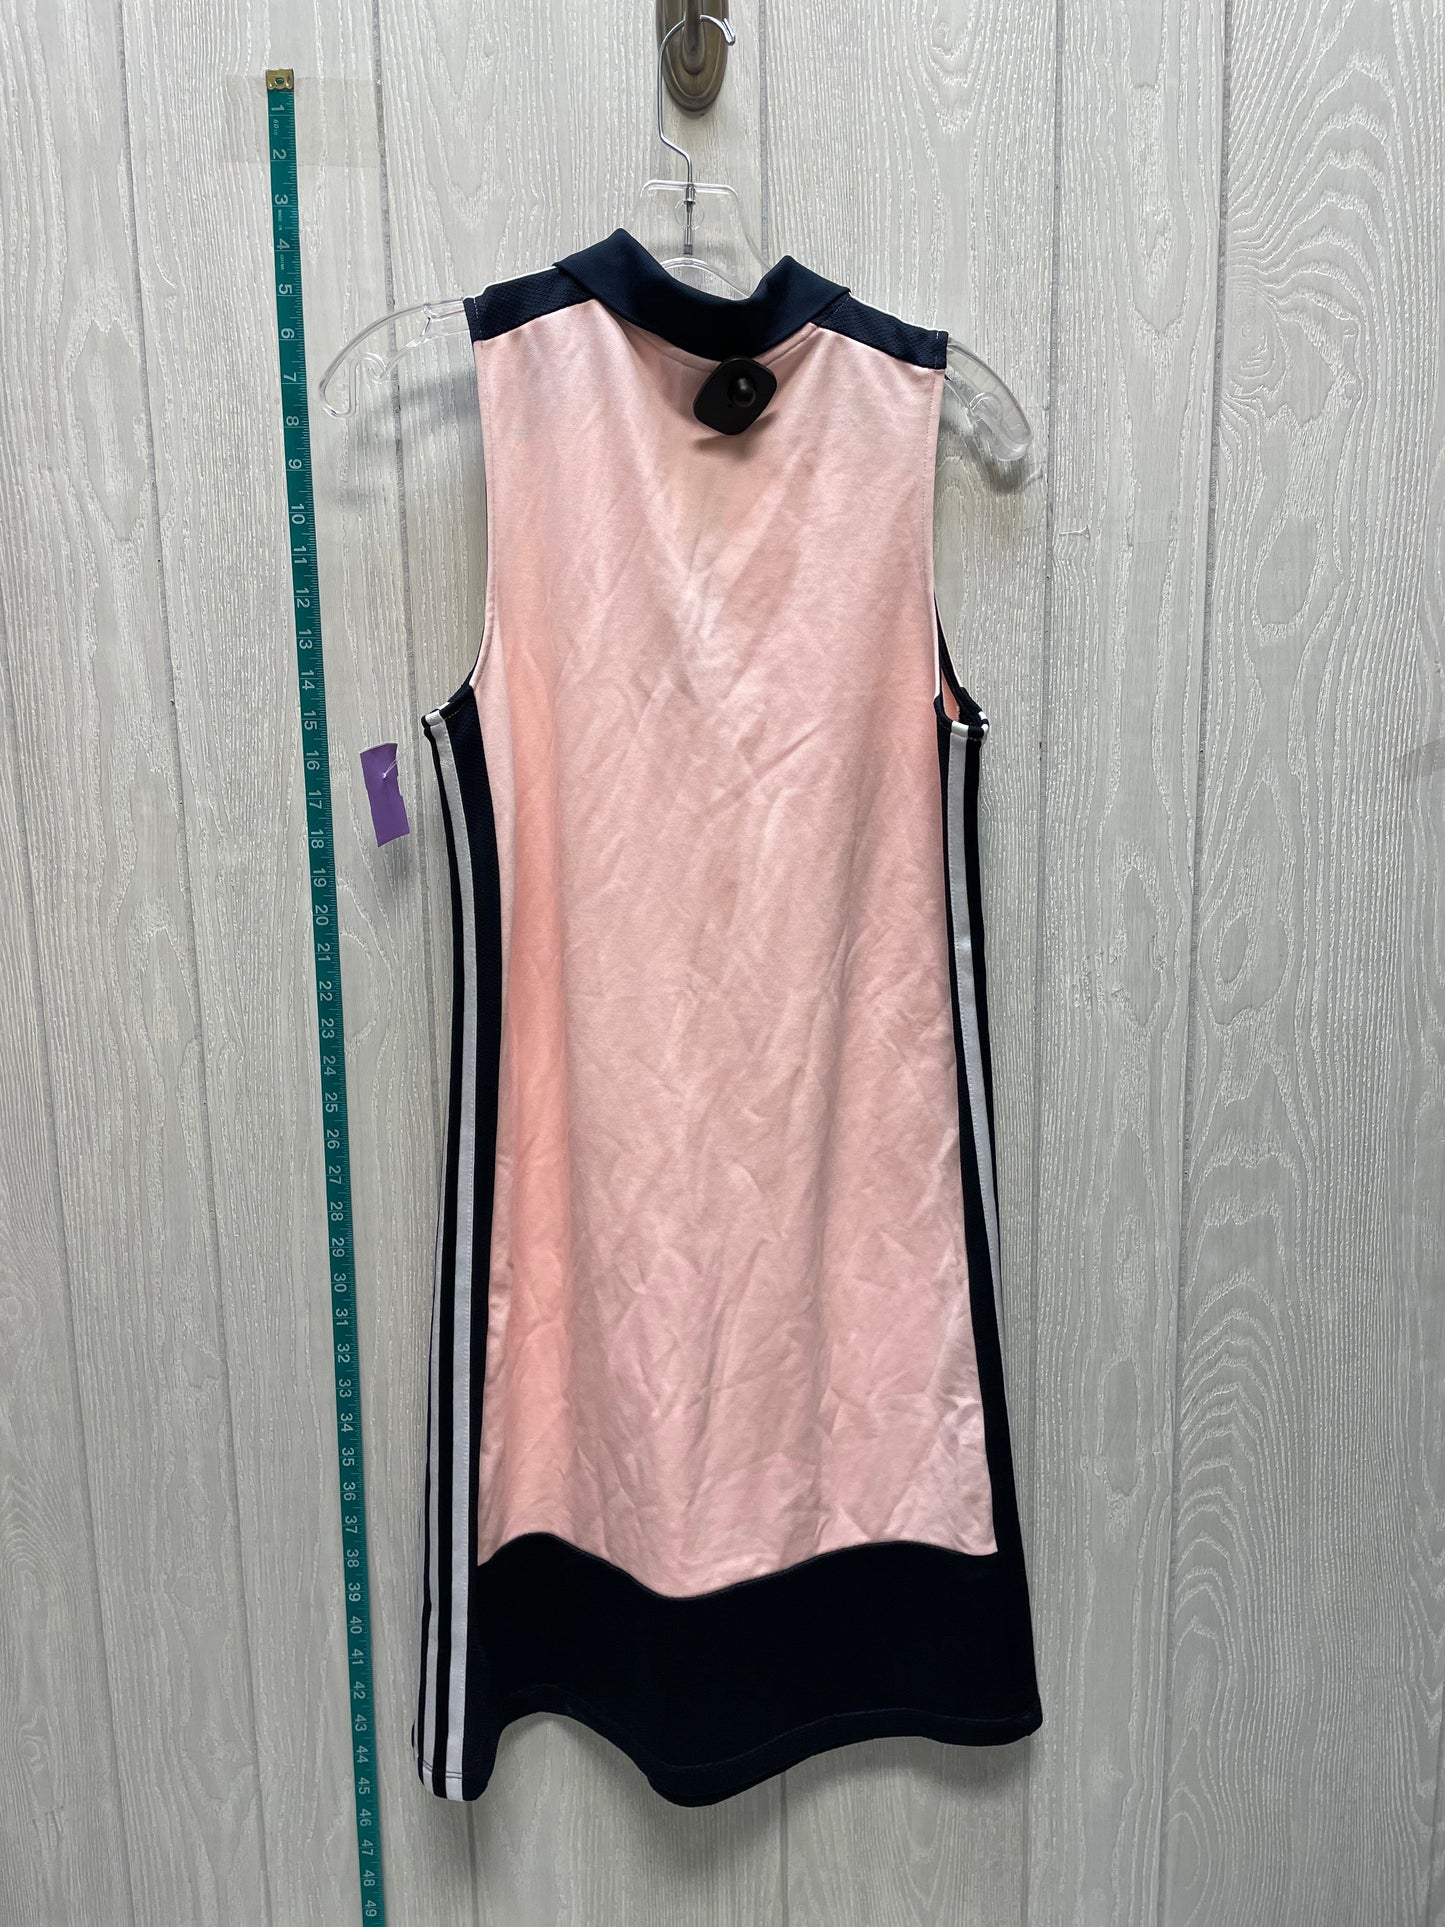 Multi-colored Dress Casual Short Adidas, Size M